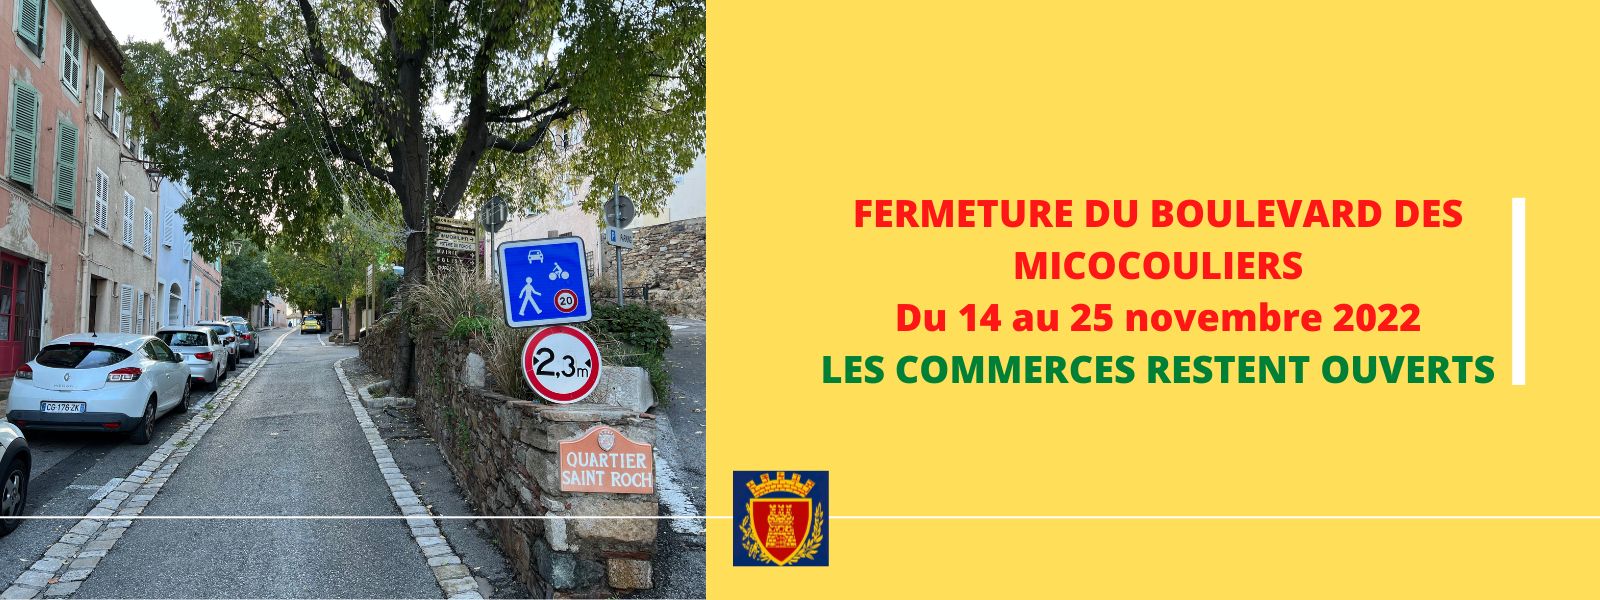 From November 14 to 25, 2022: closure of the Boulevard des micocouliers